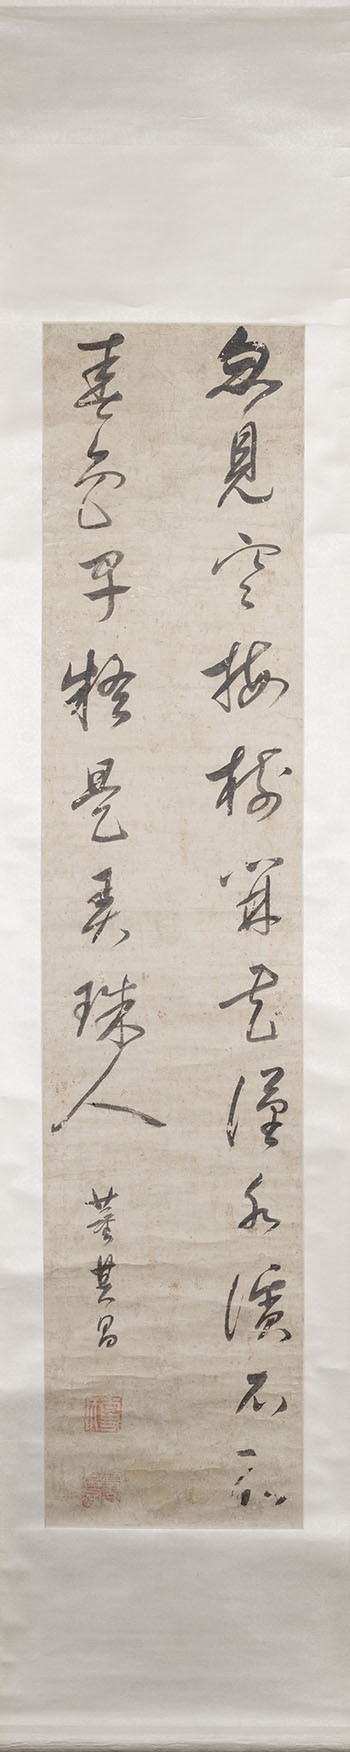 Calligraphy by After Dong Qichang sold for $2,125